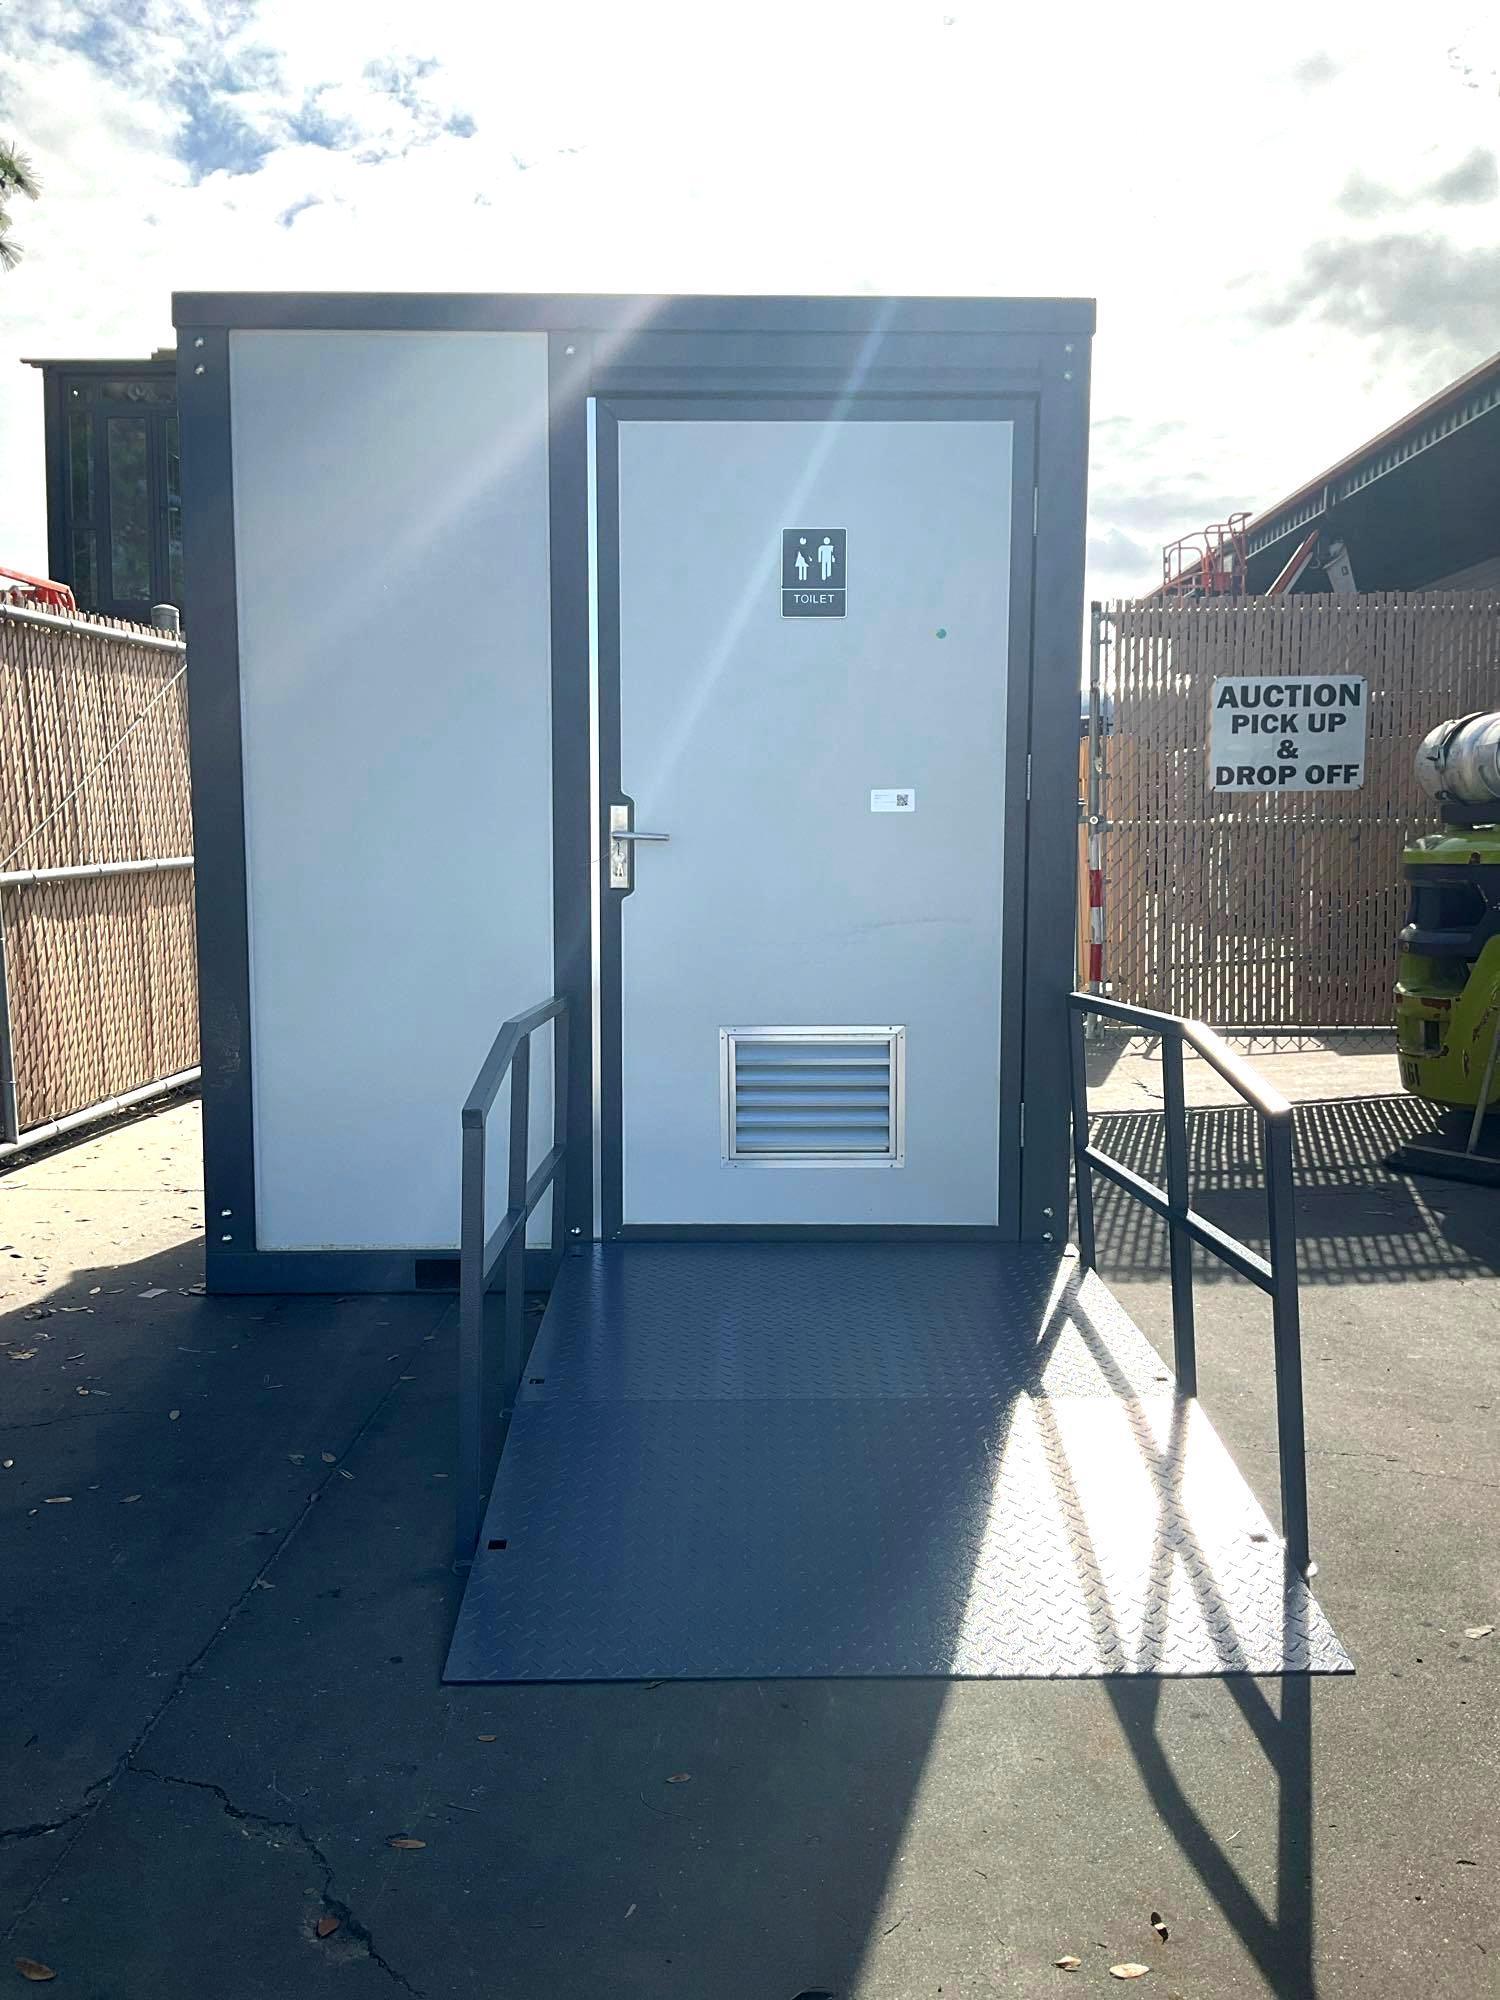 UNUSED PORTABLE BATHROOM UNIT WITH RAMP/HANDICAP ACCESSIBLE, ELECTRIC & PLUMBING HOOK UP WITH EX